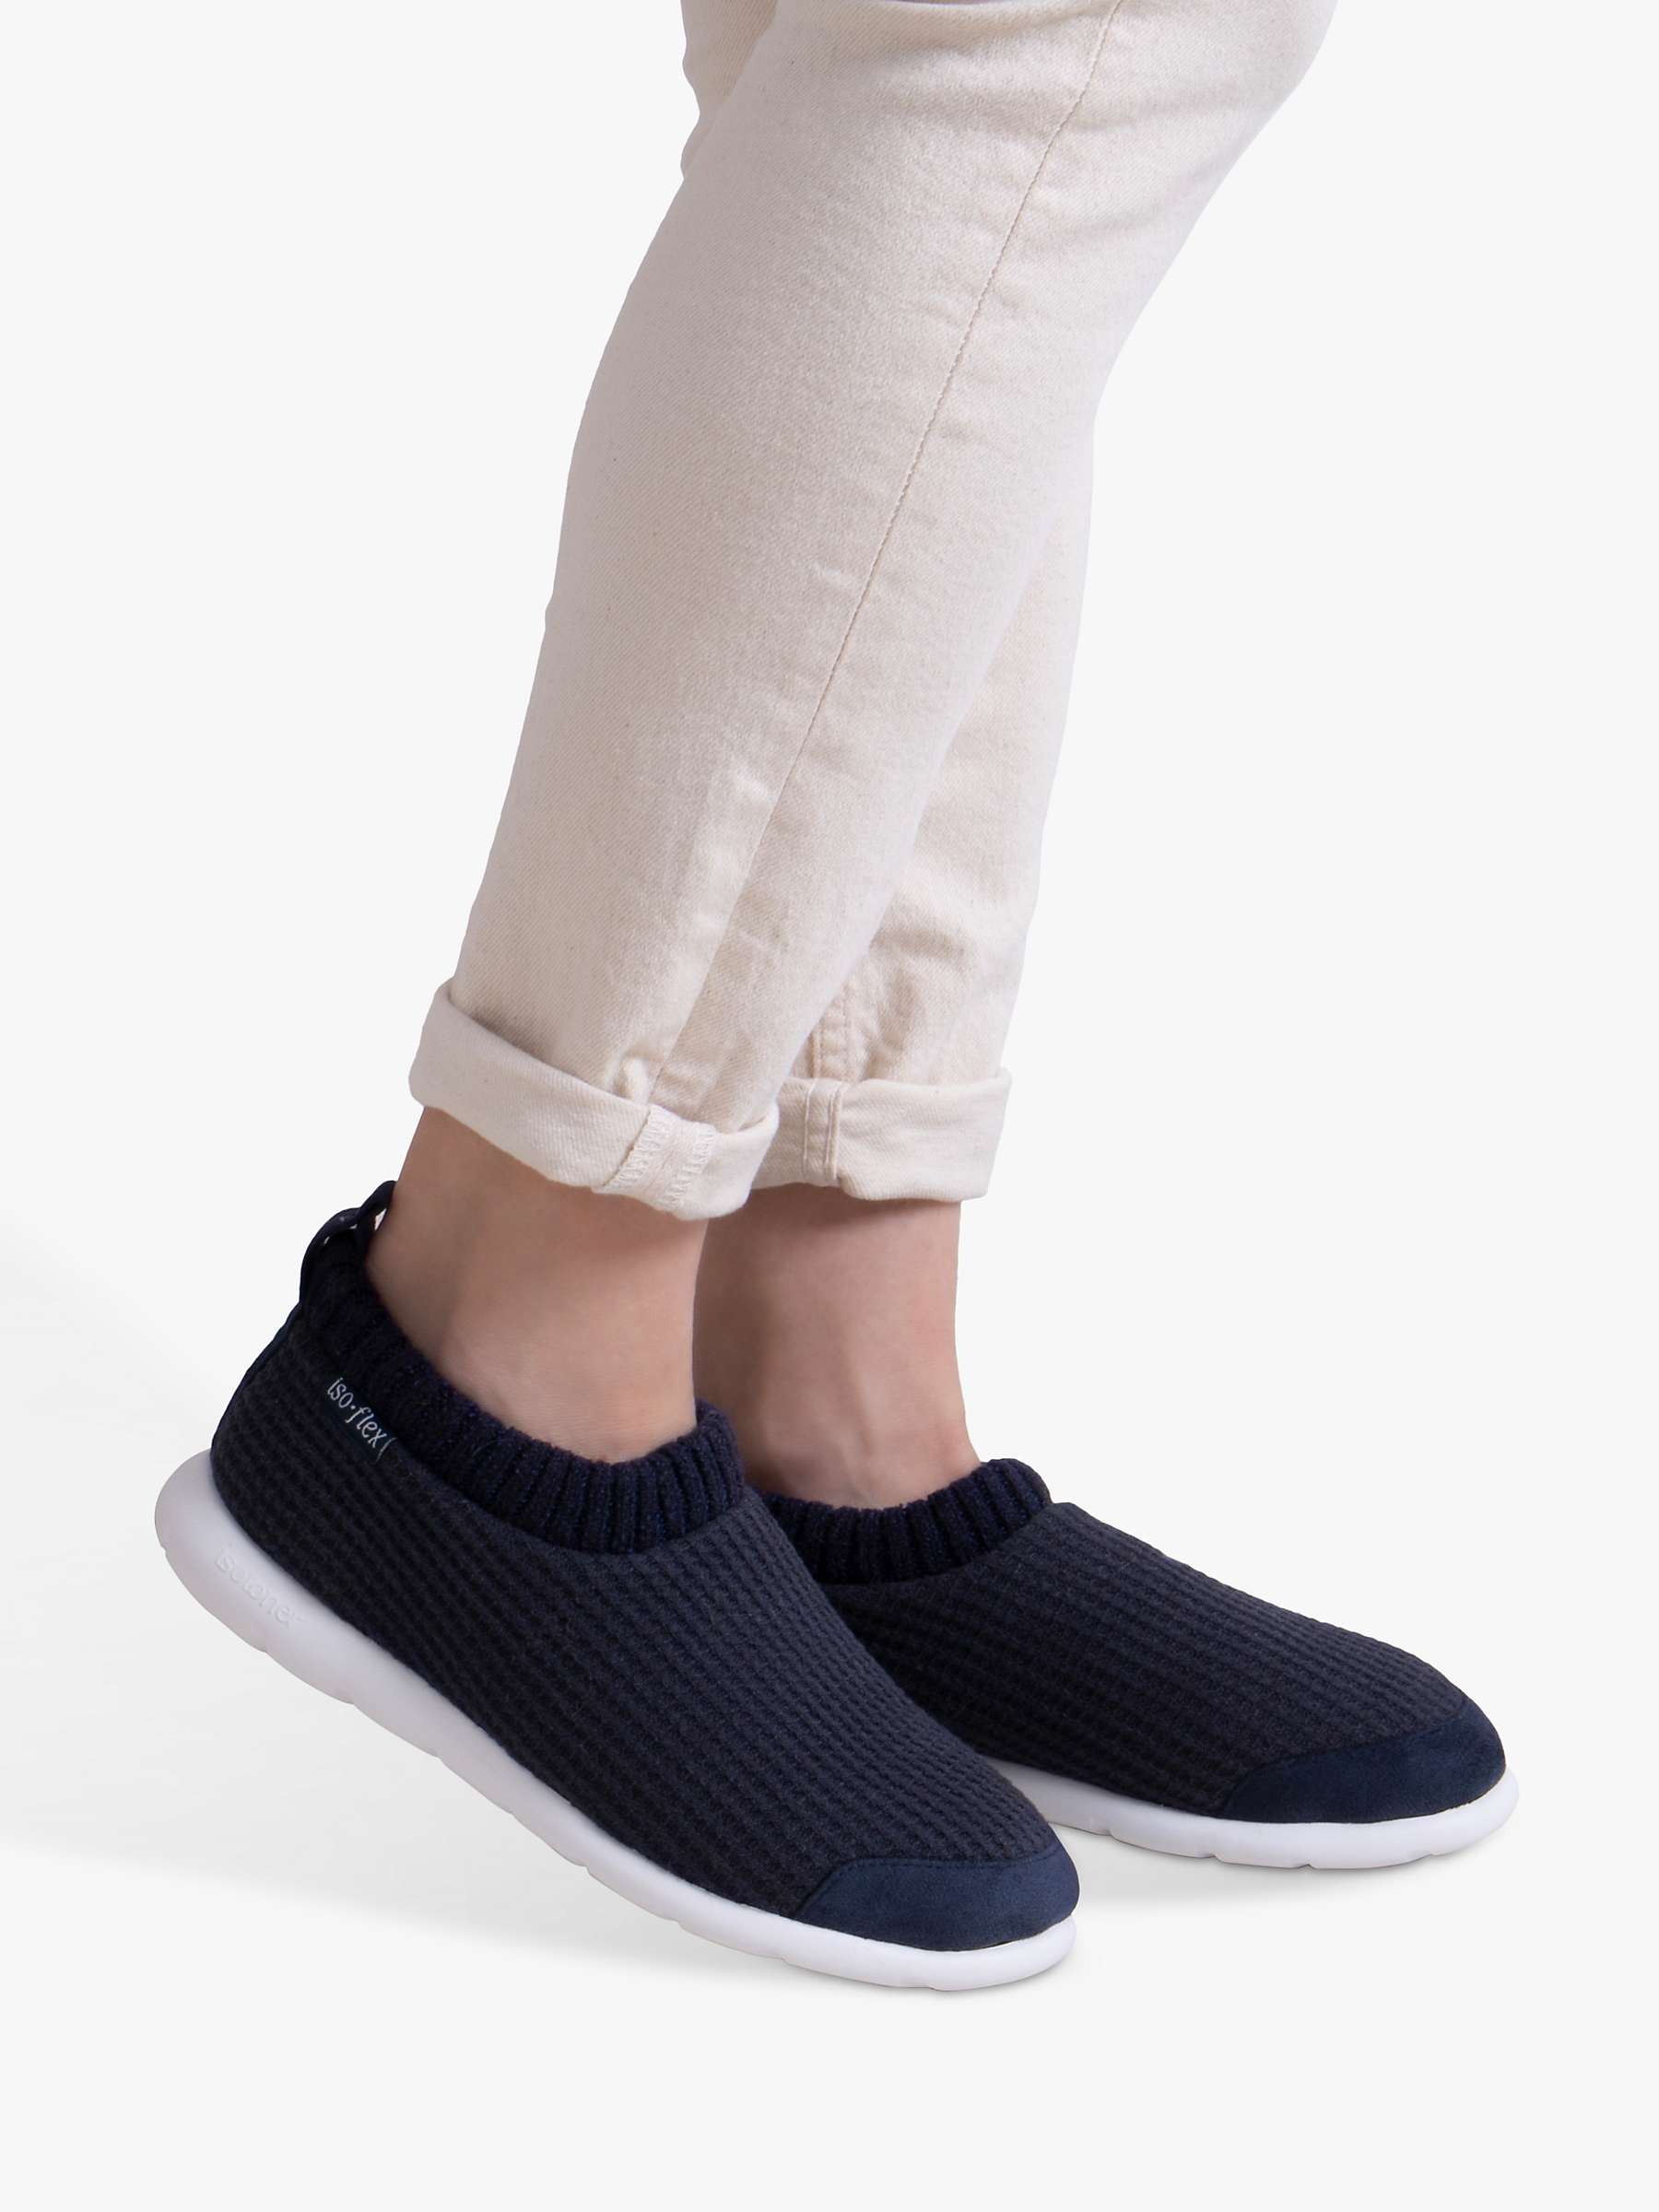 Buy totes Iso Flex Waffle Bootie Slippers, Navy Online at johnlewis.com